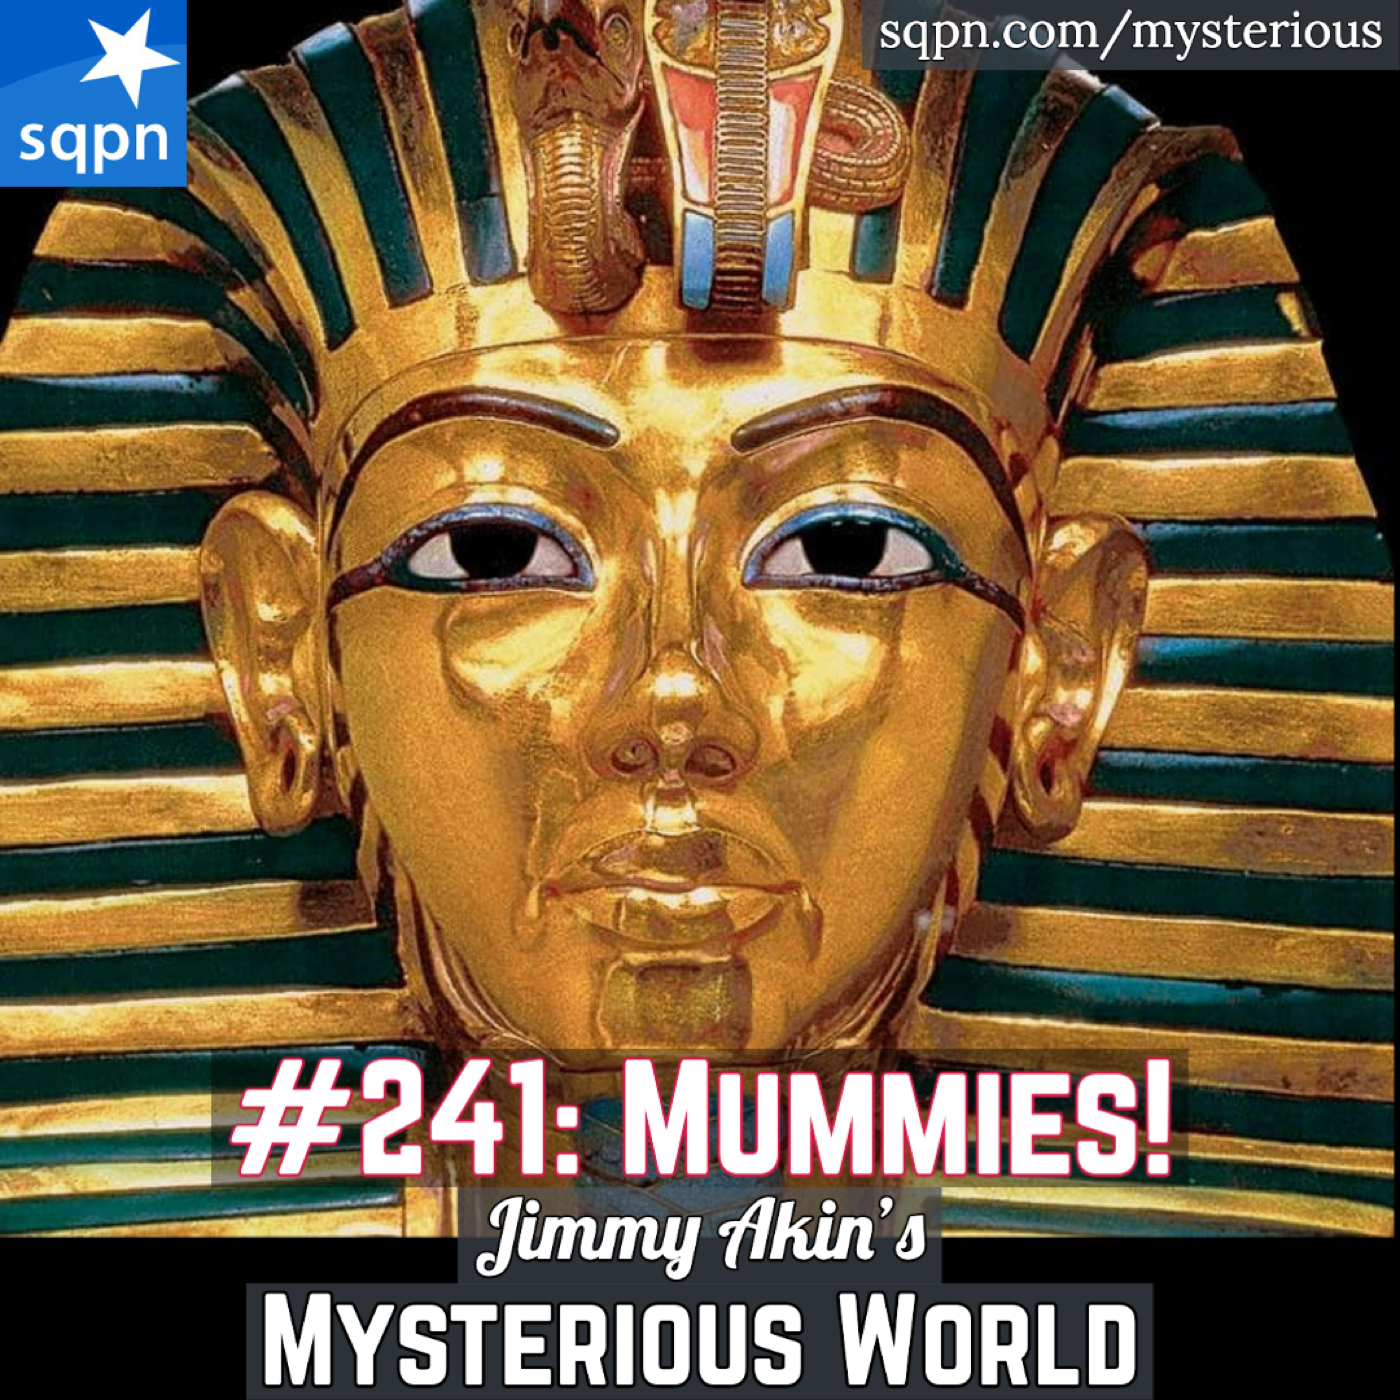 The Mystery of Mummies (Dr. Bob Brier, Ancient Egypt)